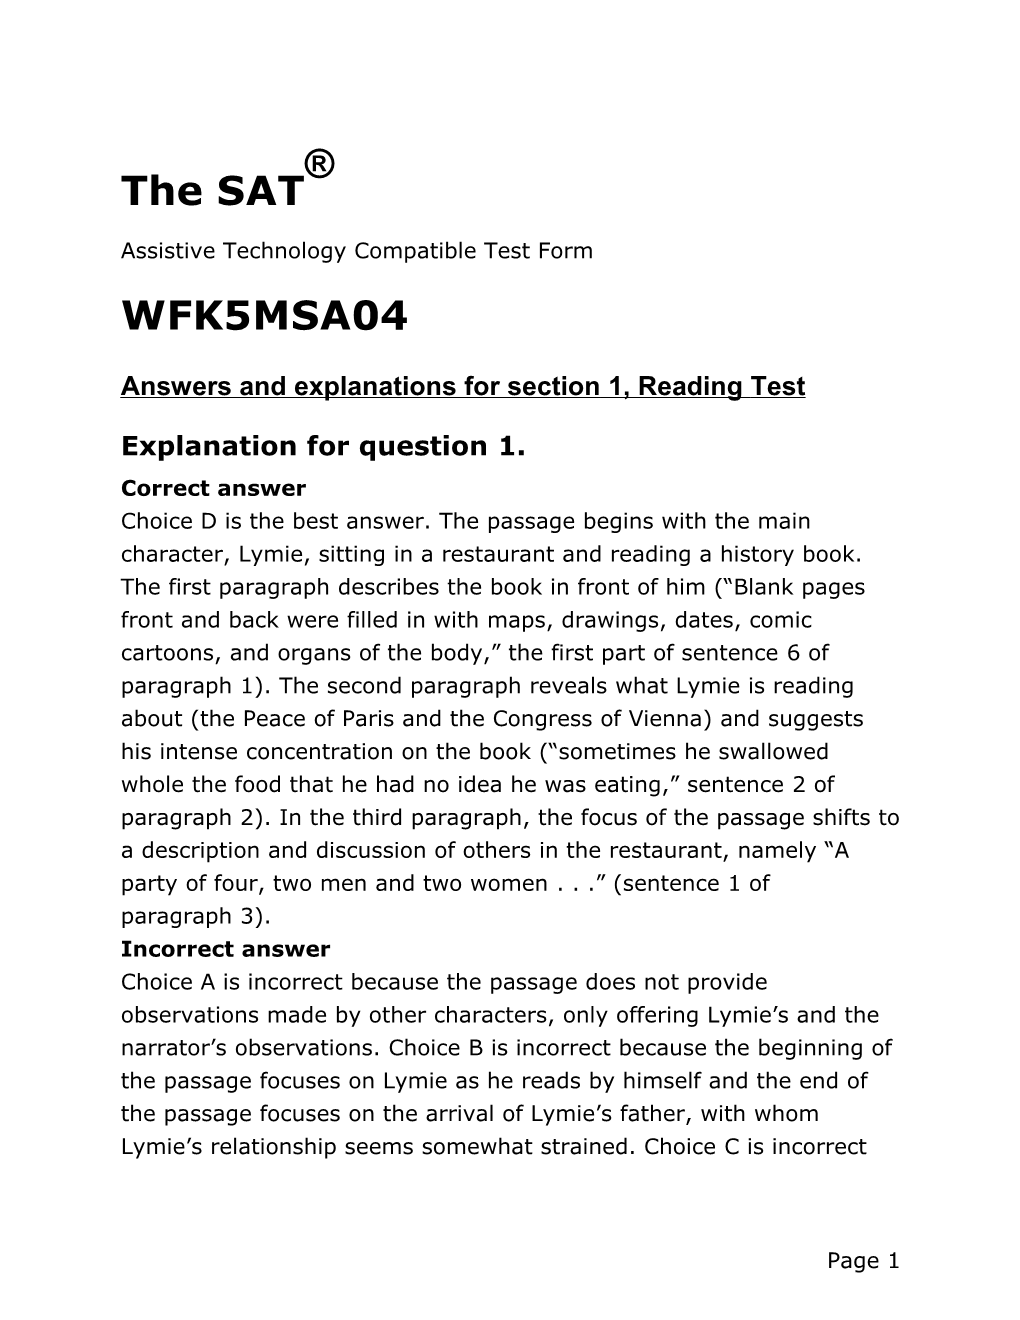 Answers and Explanations for Section1, Readingtest